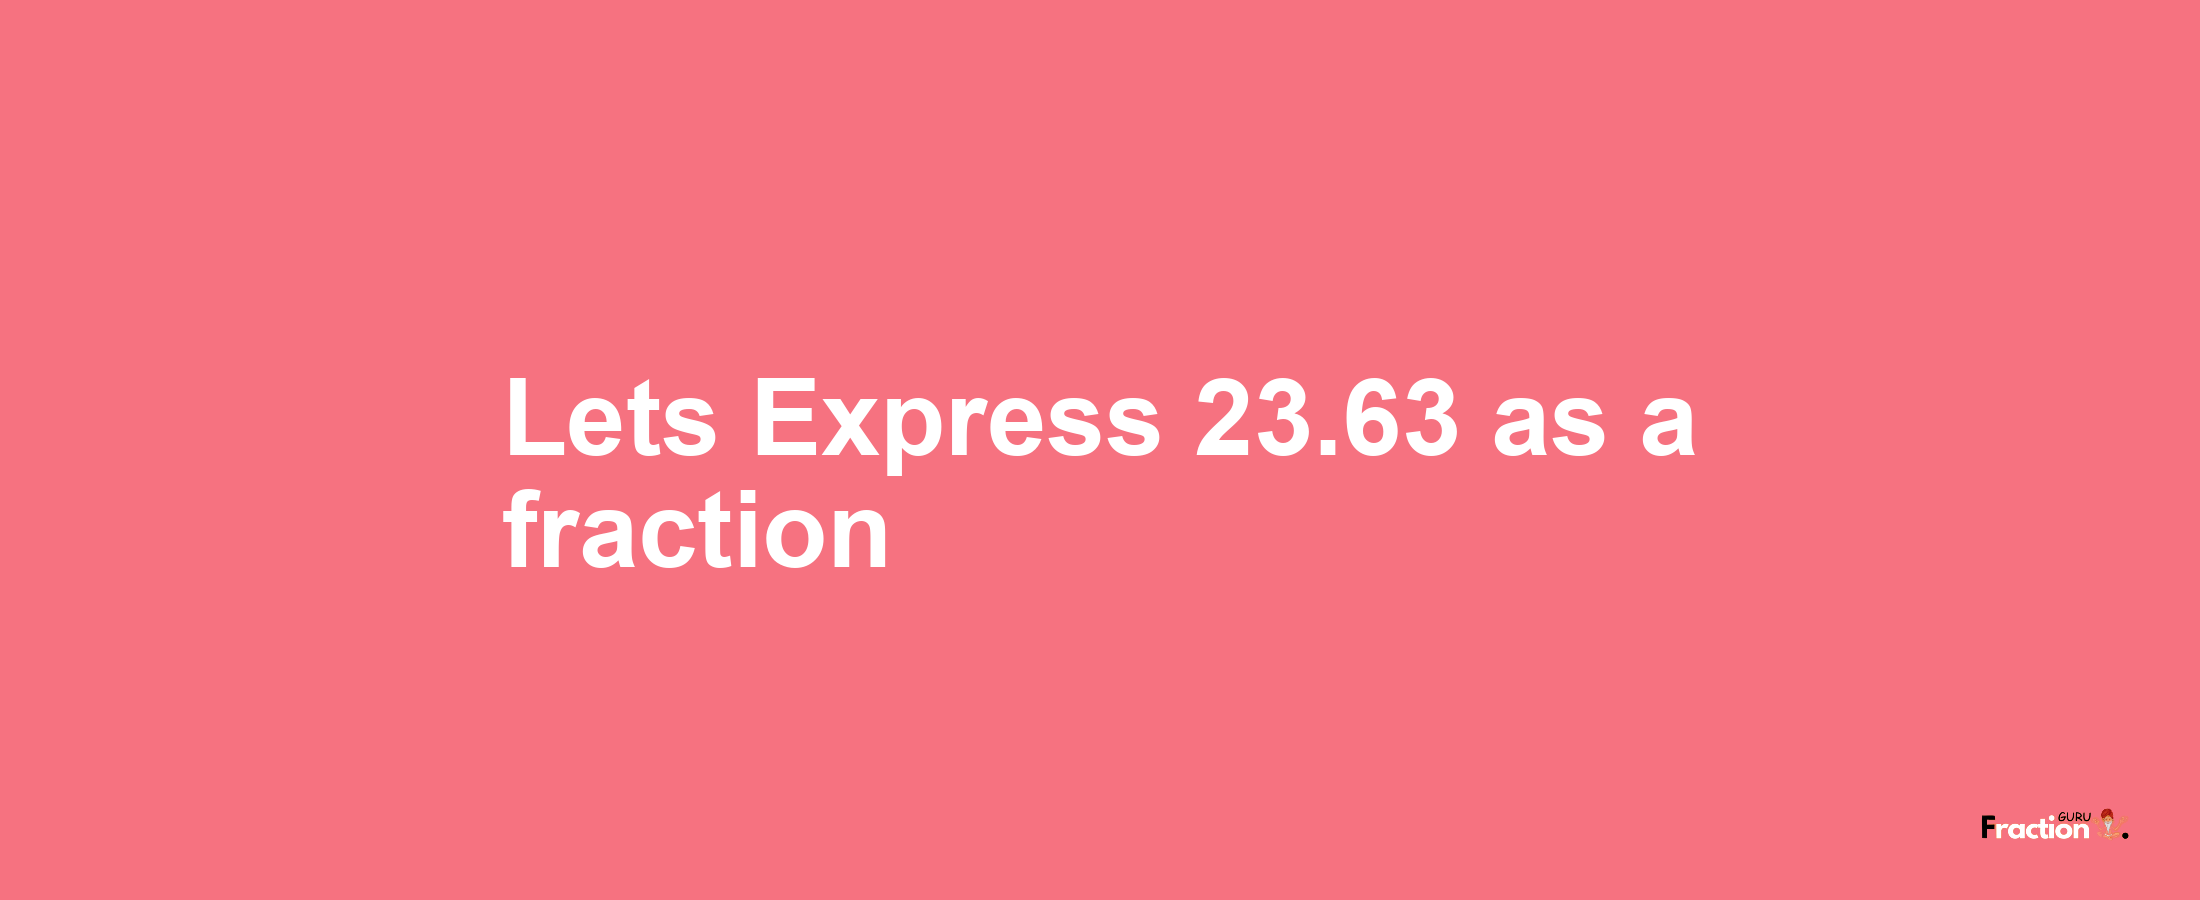 Lets Express 23.63 as afraction